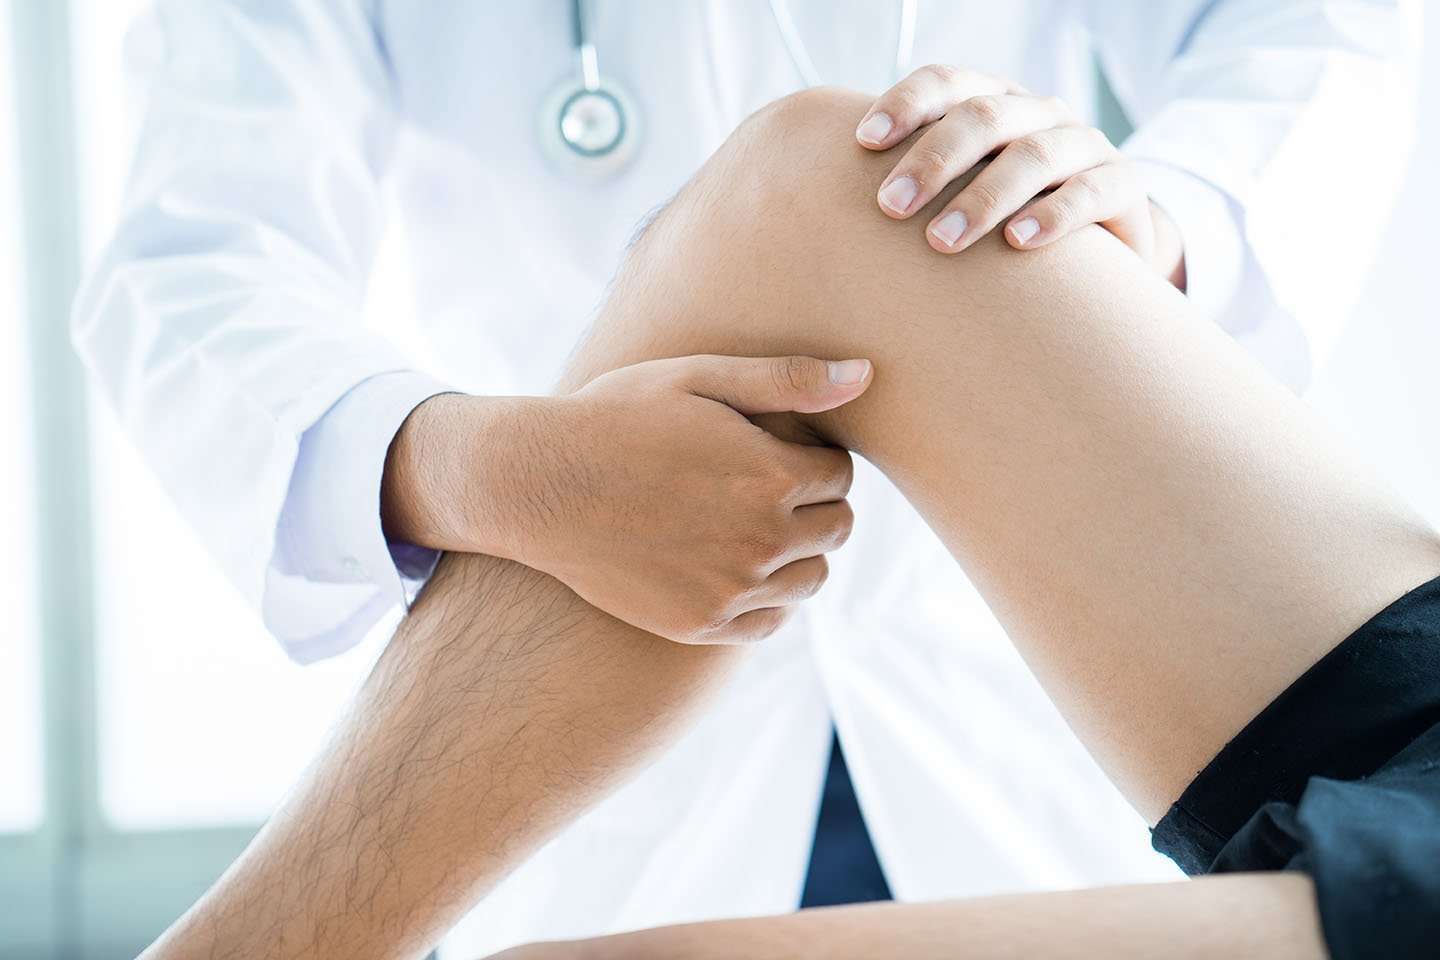 Should you get an MRI for knee pain?